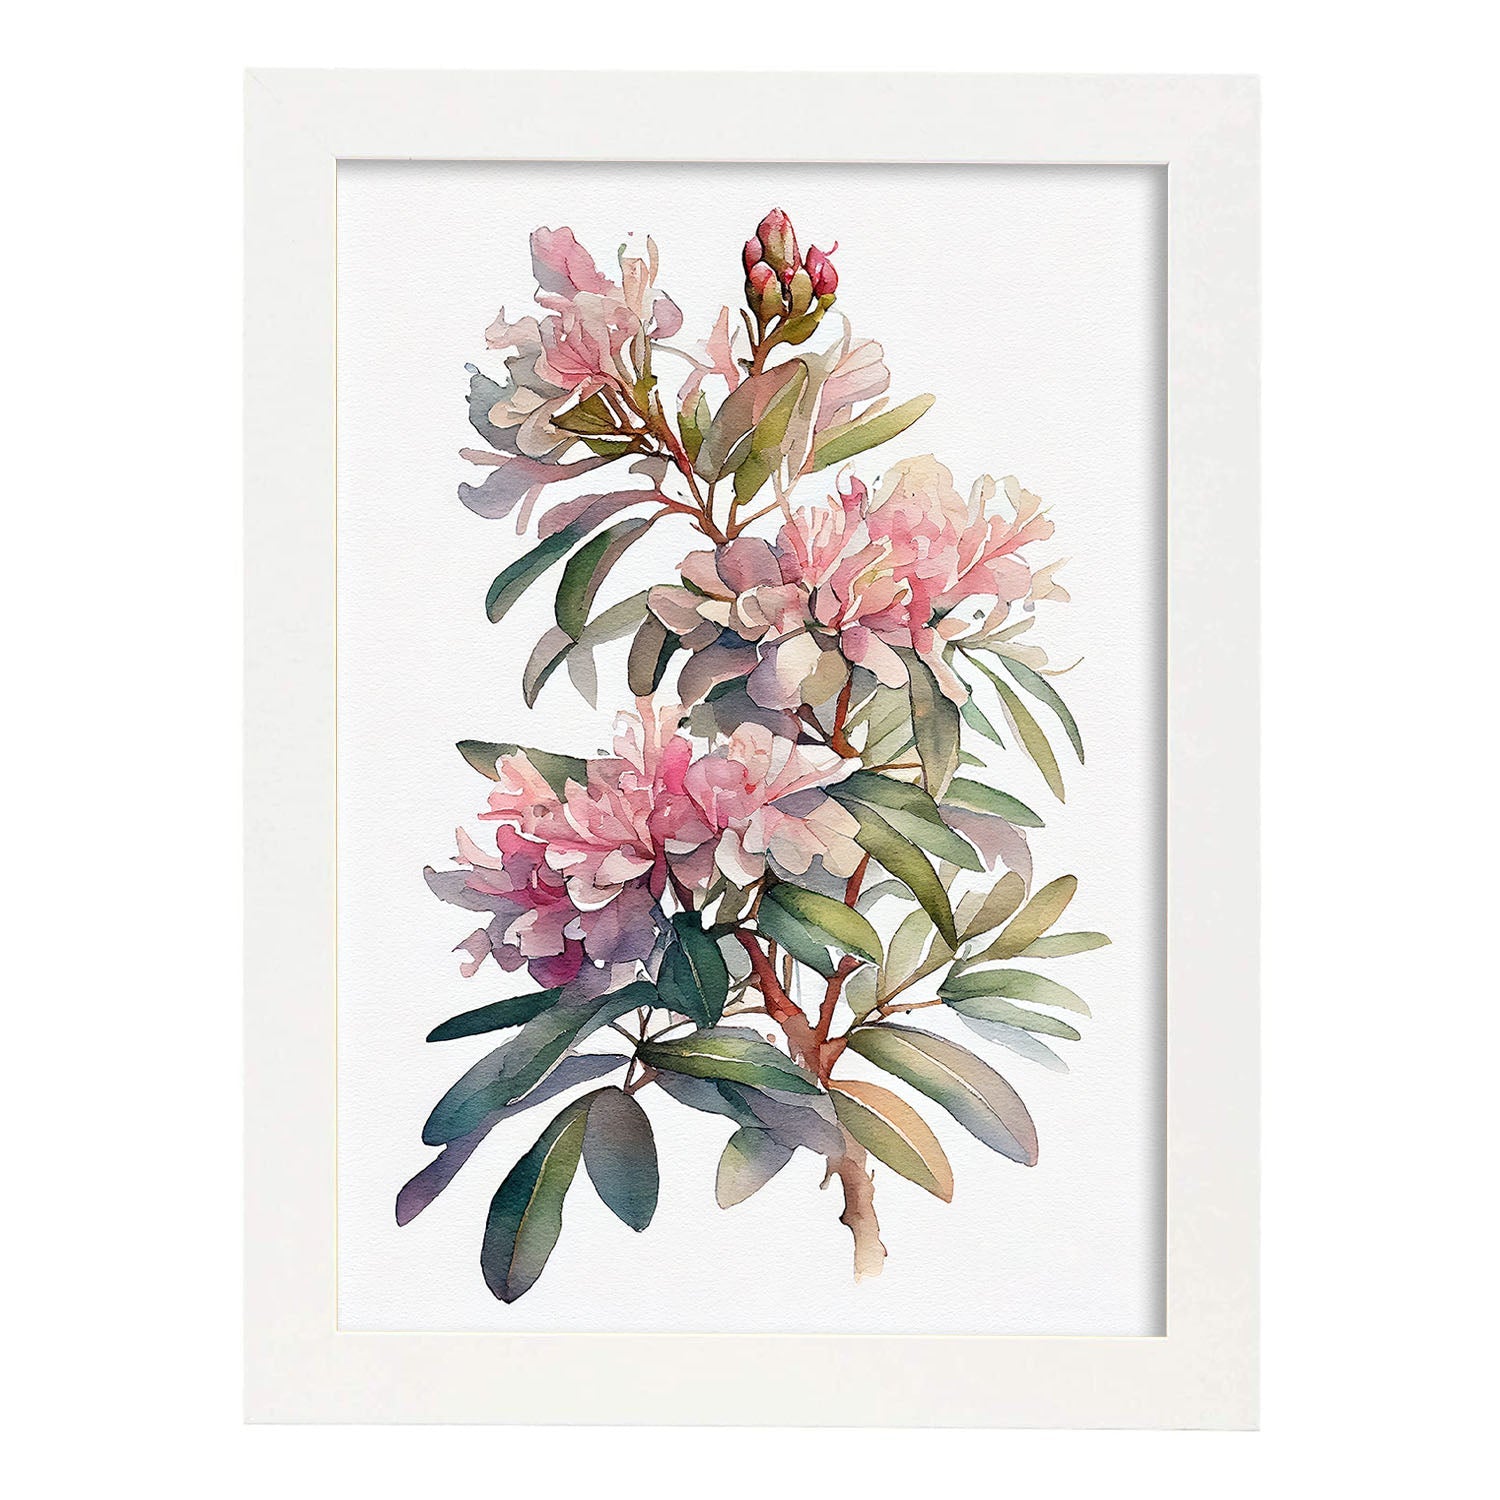 Nacnic watercolor minmal Rhododendron_1. Aesthetic Wall Art Prints for Bedroom or Living Room Design.-Artwork-Nacnic-A4-Marco Blanco-Nacnic Estudio SL